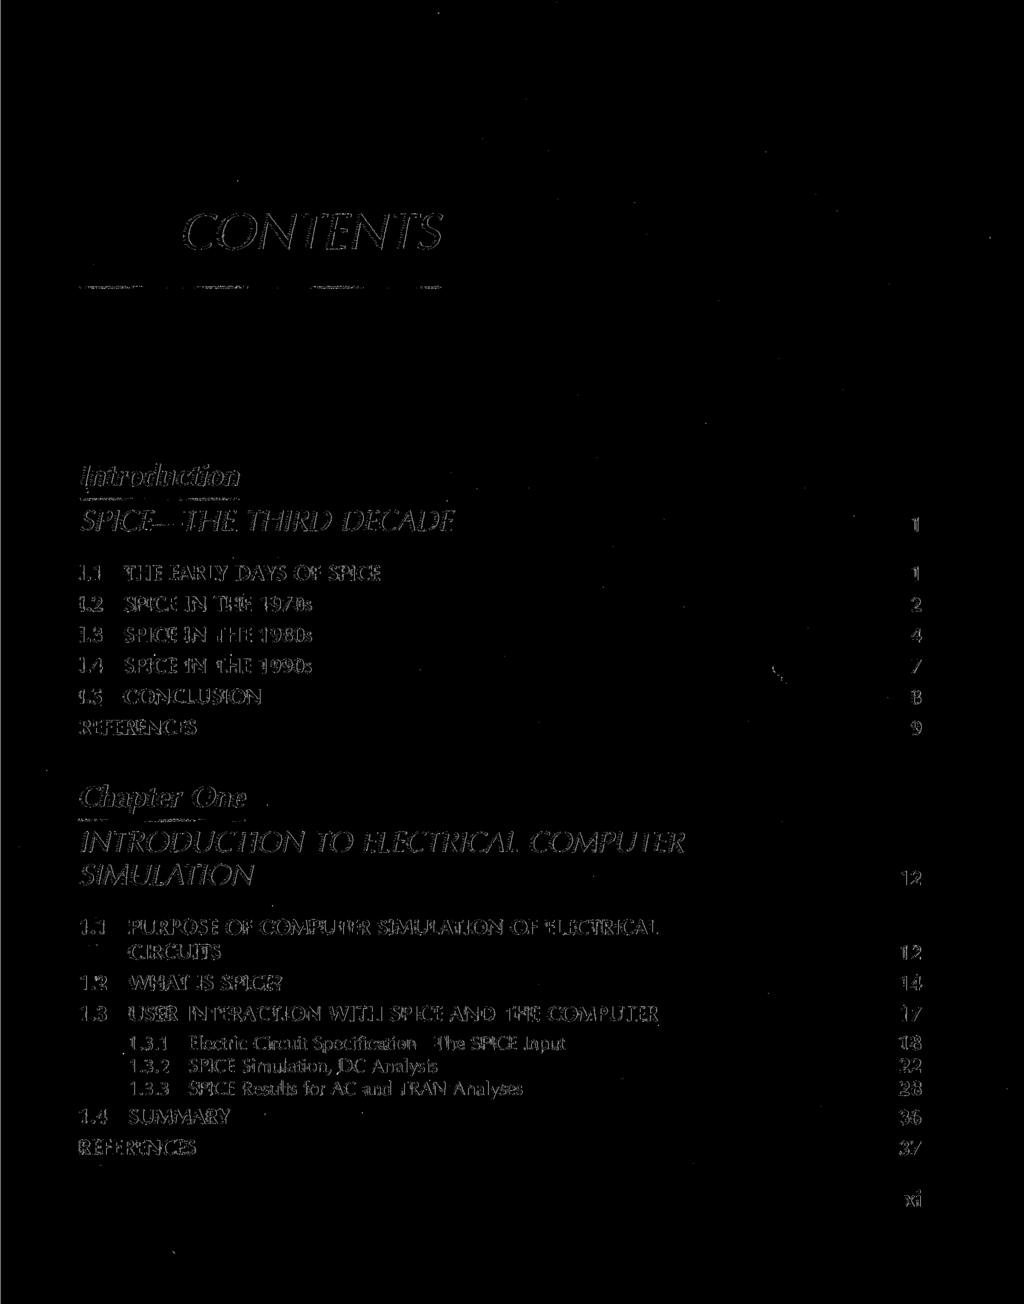 CONTENTS Introduction SPICE THE THIRD DECADE 1 1.1 THE EARLY DAYS OF SPICE 1 1.2 SPICE IN THE 1970s 2 1.3 SPICE IN THE 1980s 4 1.4 SPICE IN THE 1990s 7 1.